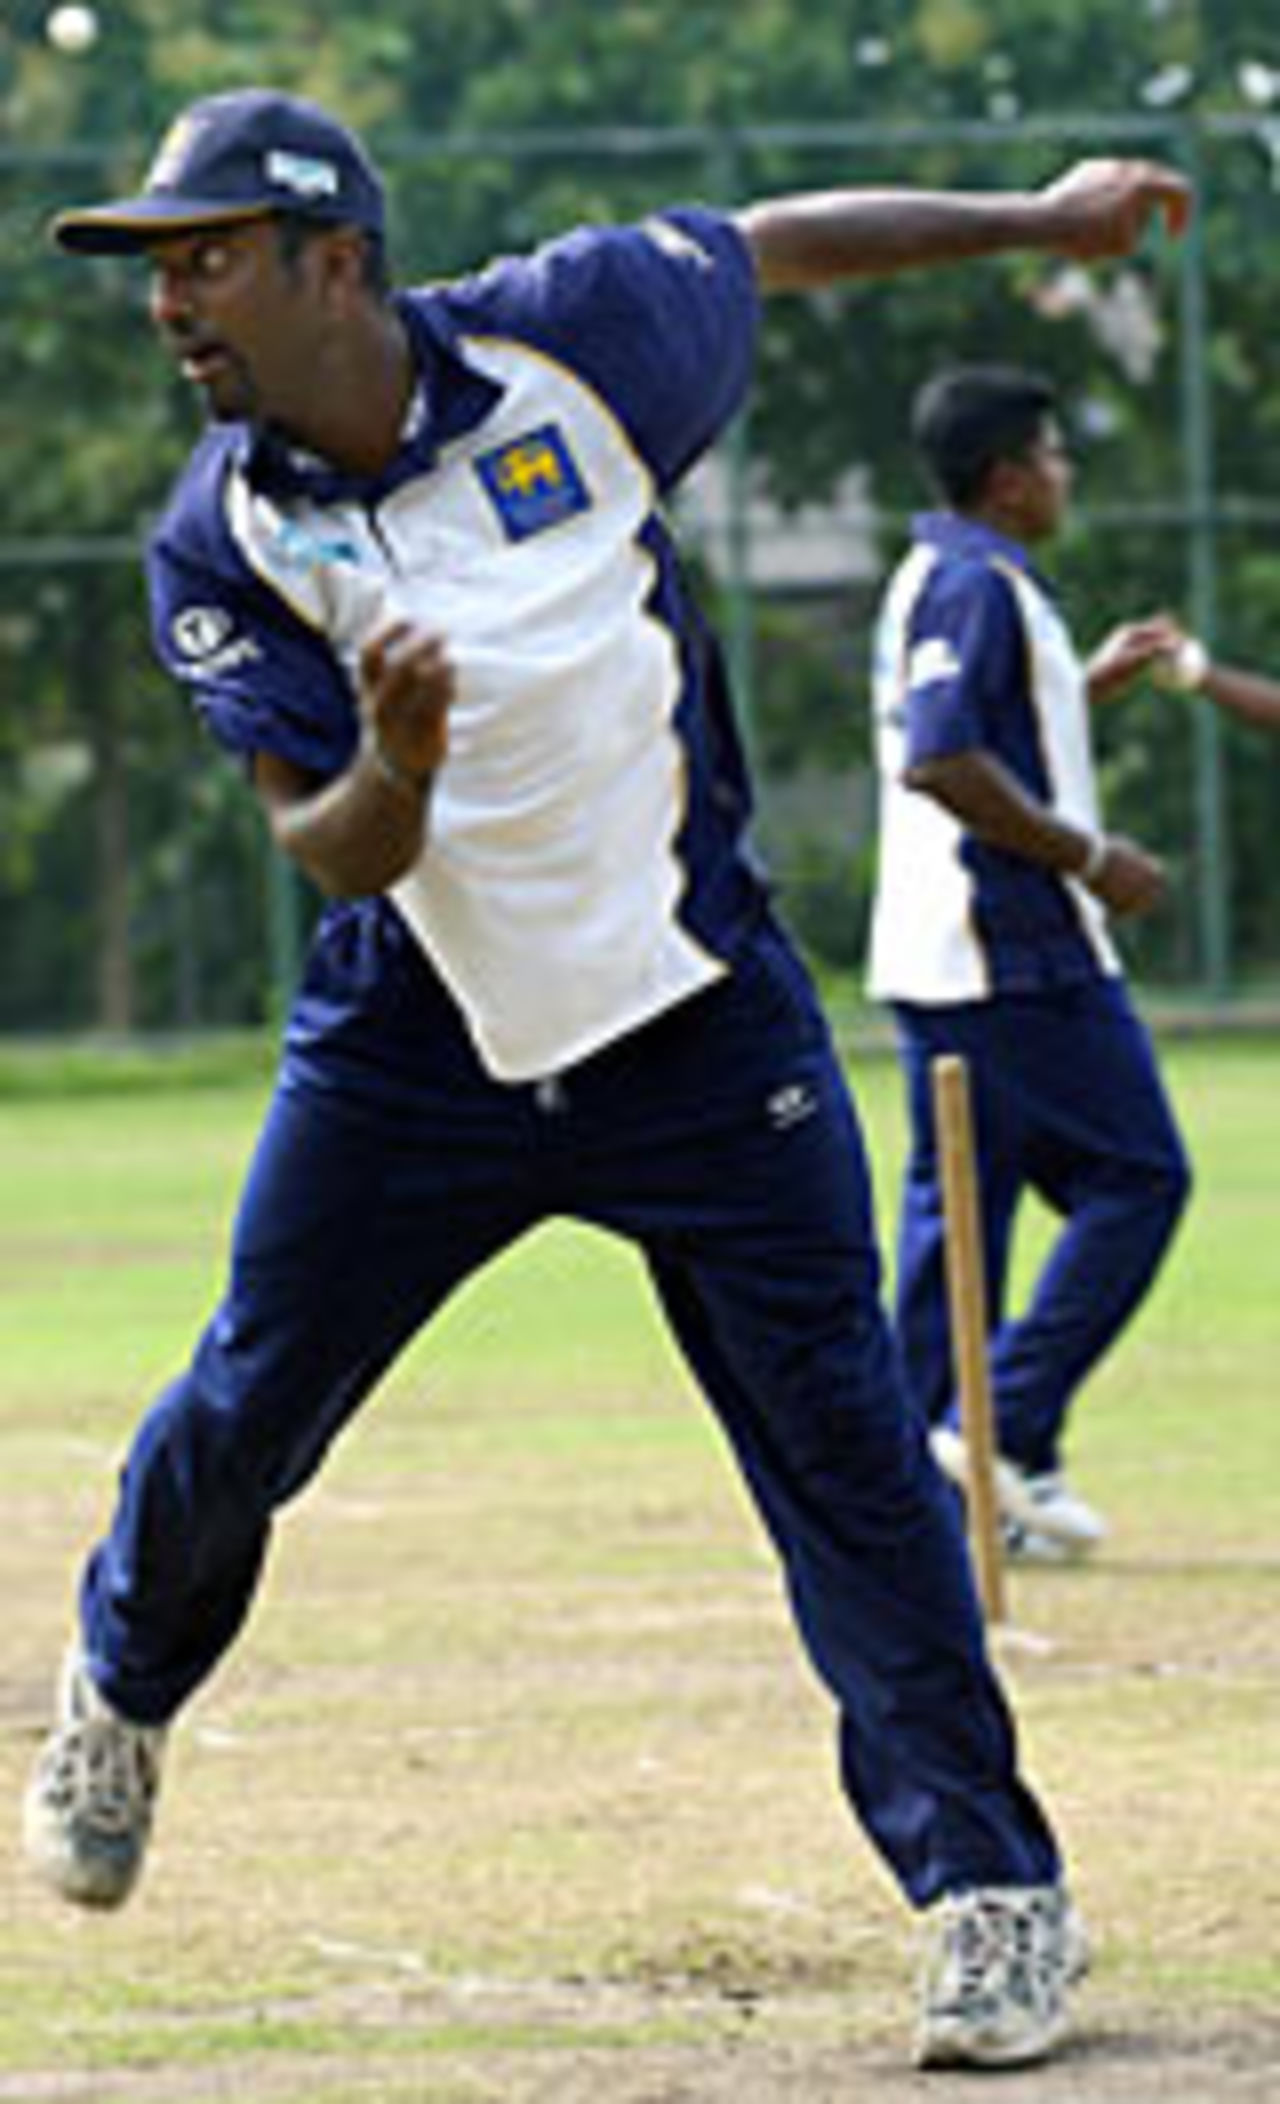 Muttiah Muralitharan practises in the nets in Colombo ahead of the Asia Cup match against India, July 26, 2004